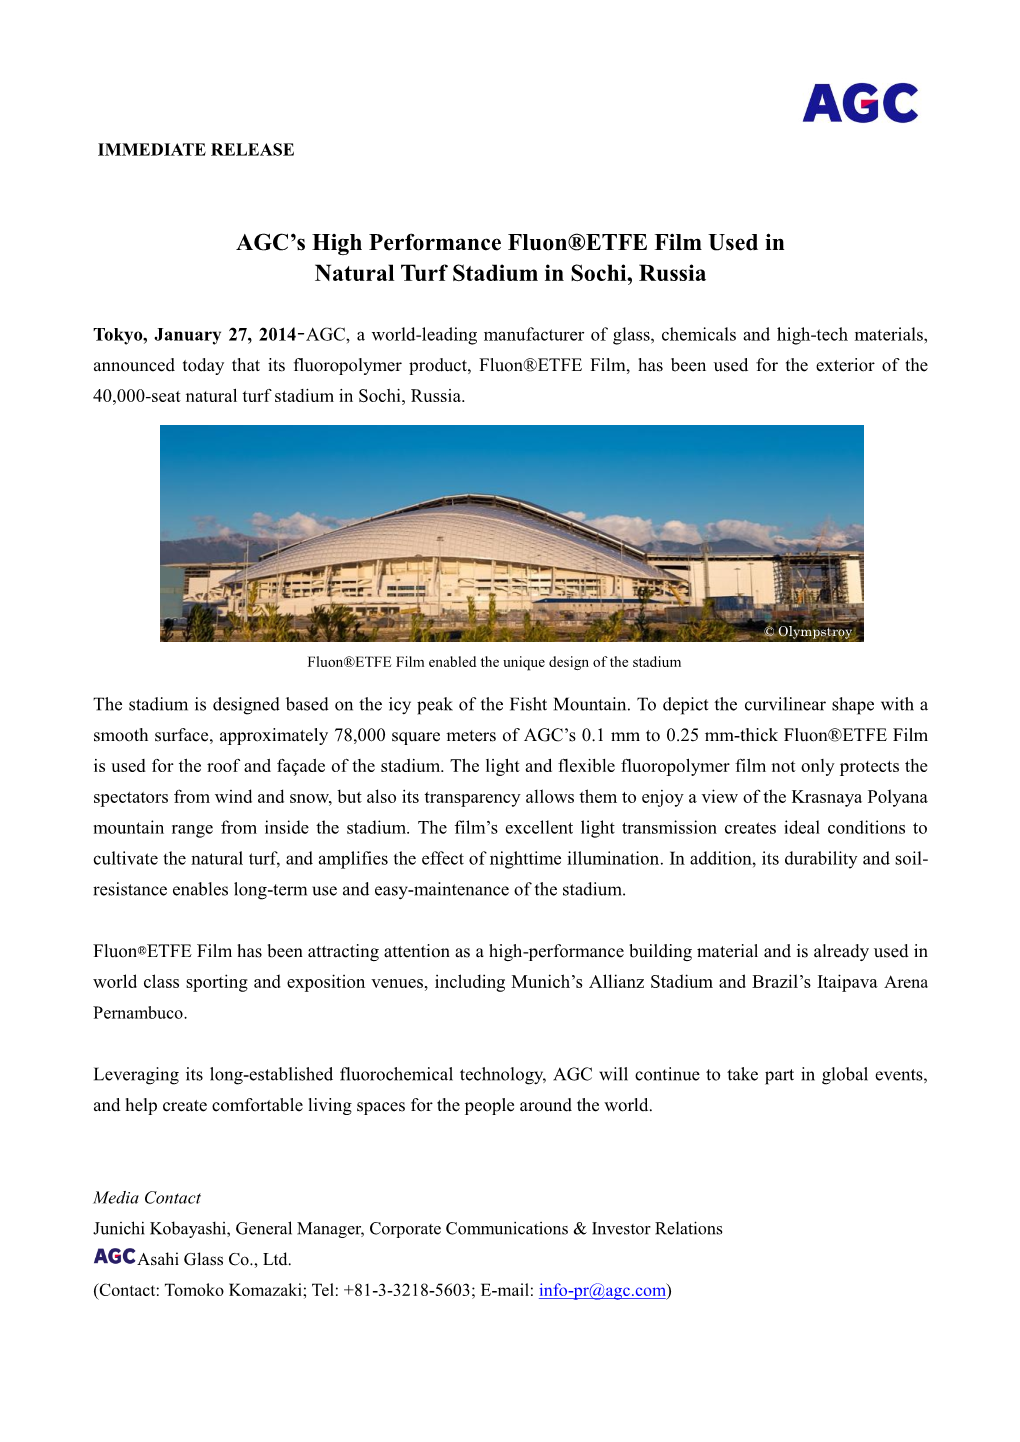 AGC's High Performance Fluon®ETFE Film Used in Natural Turf